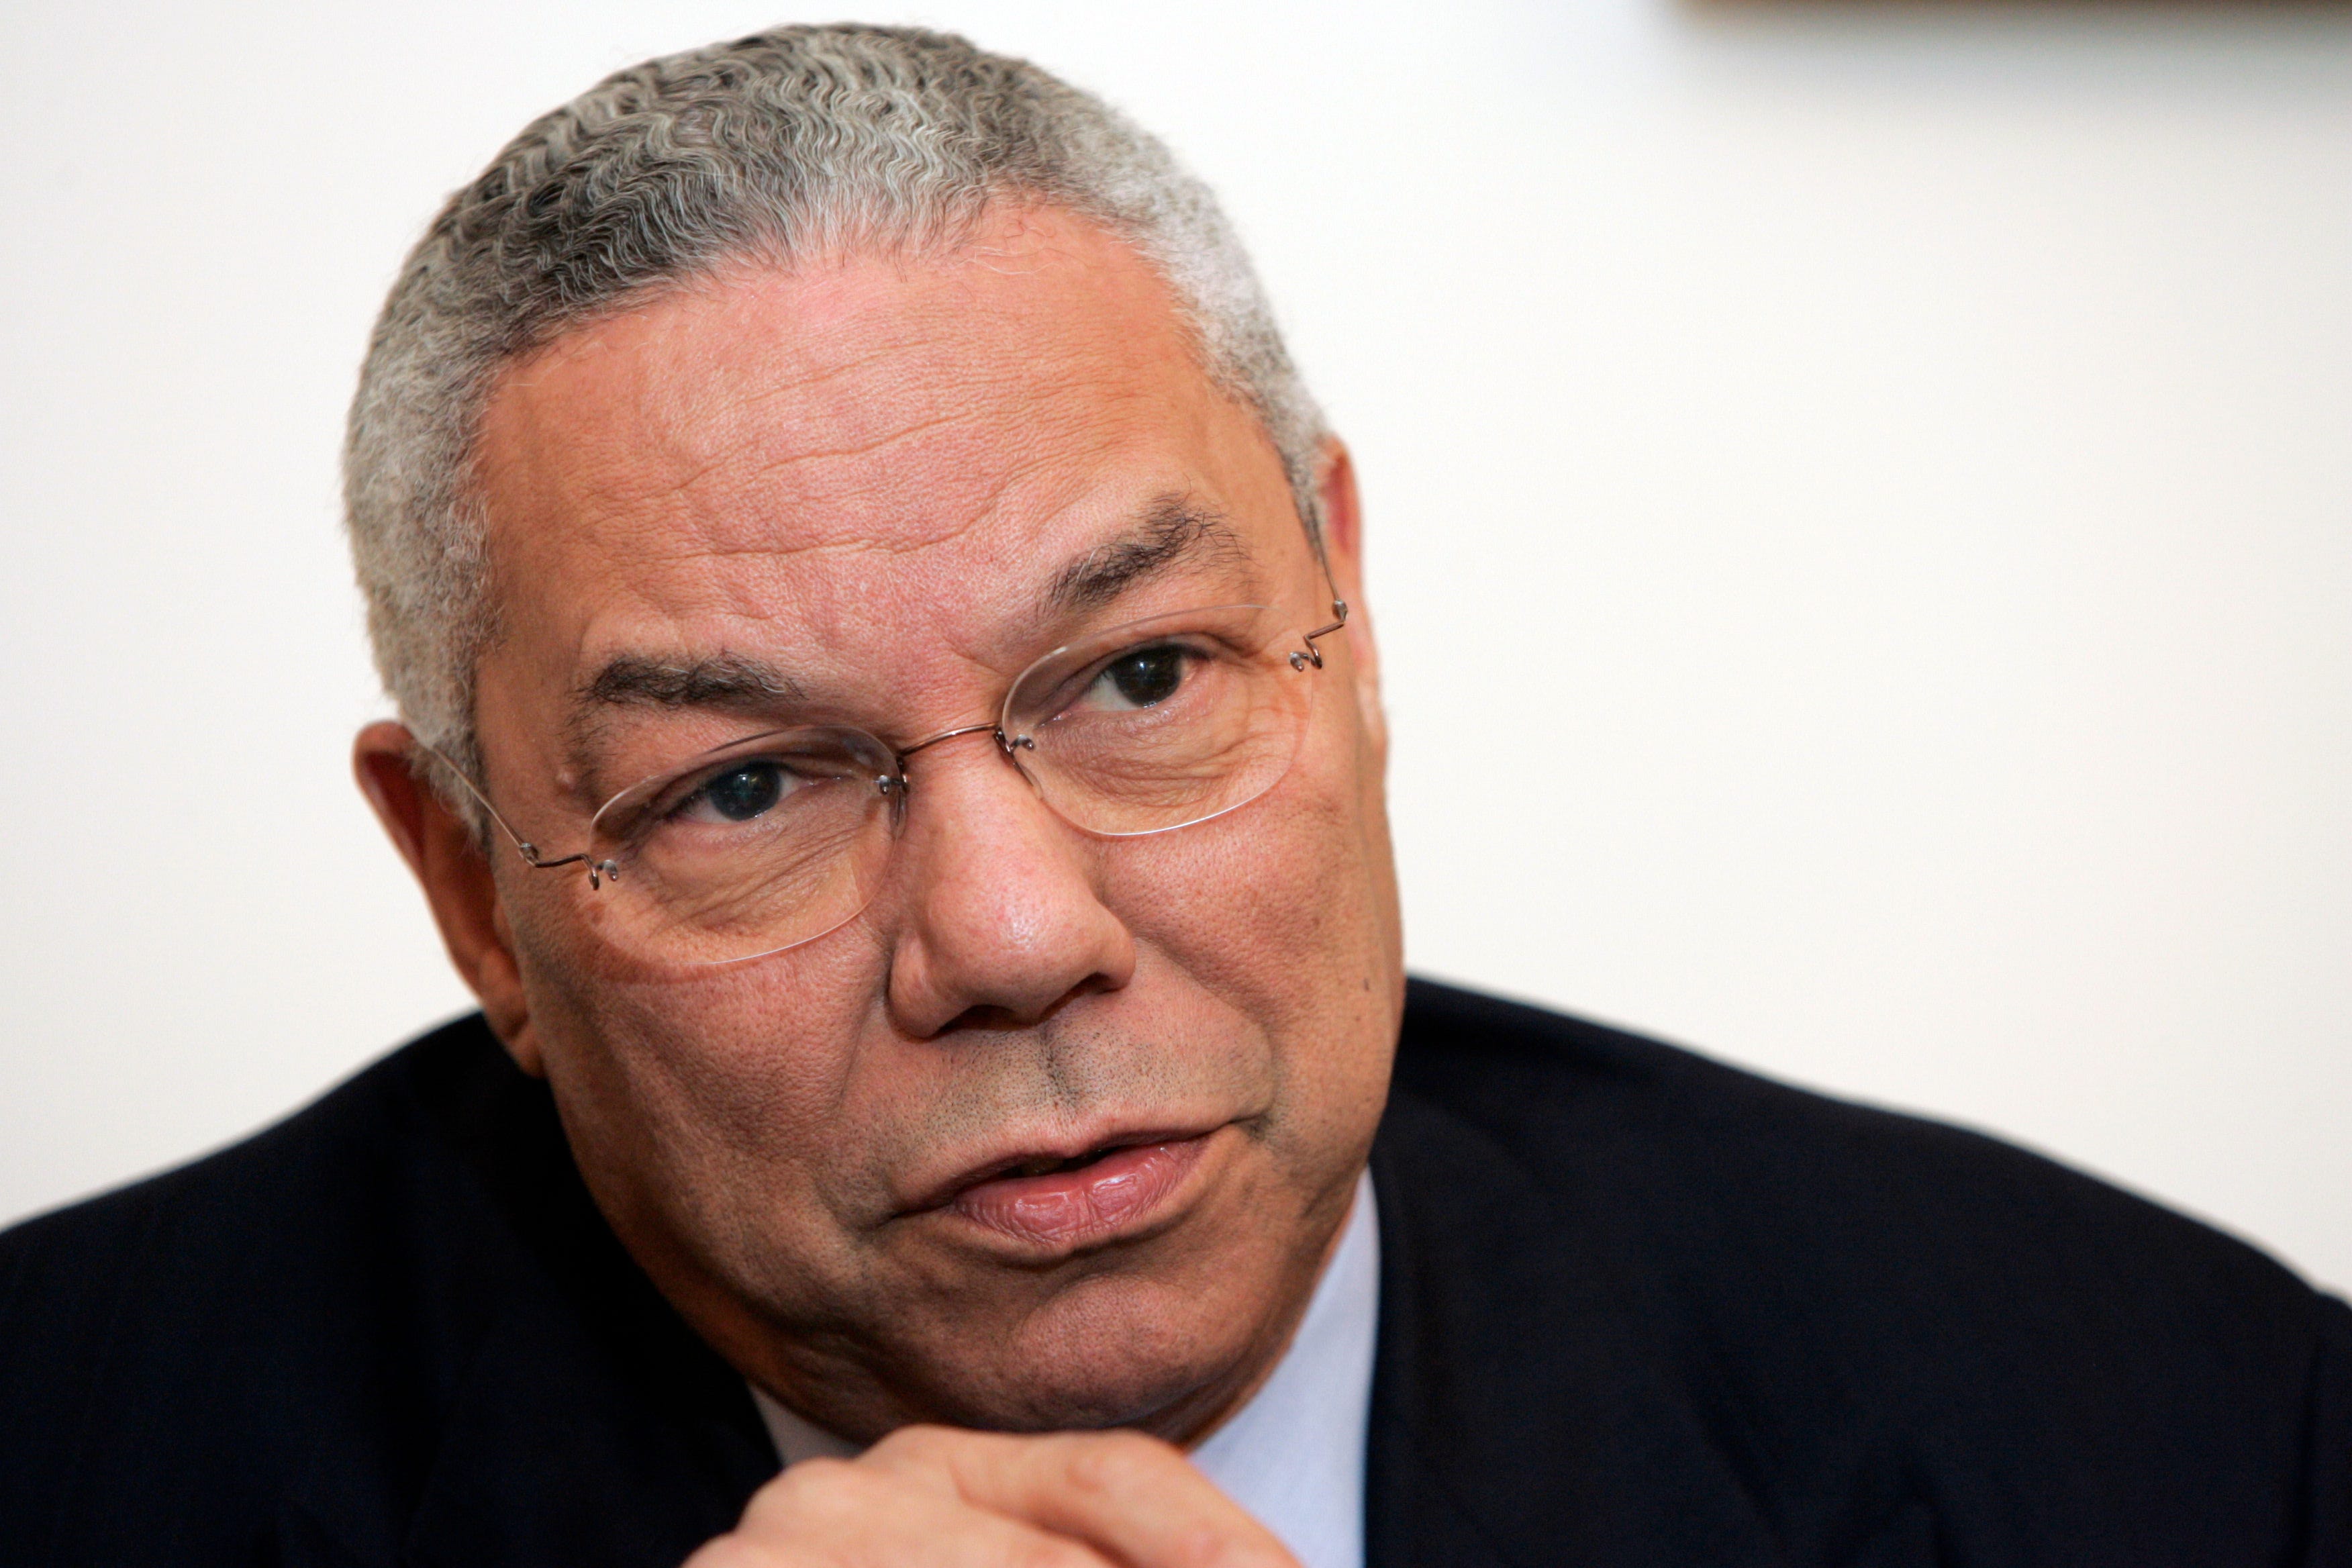 Colin Powell looks to the side.